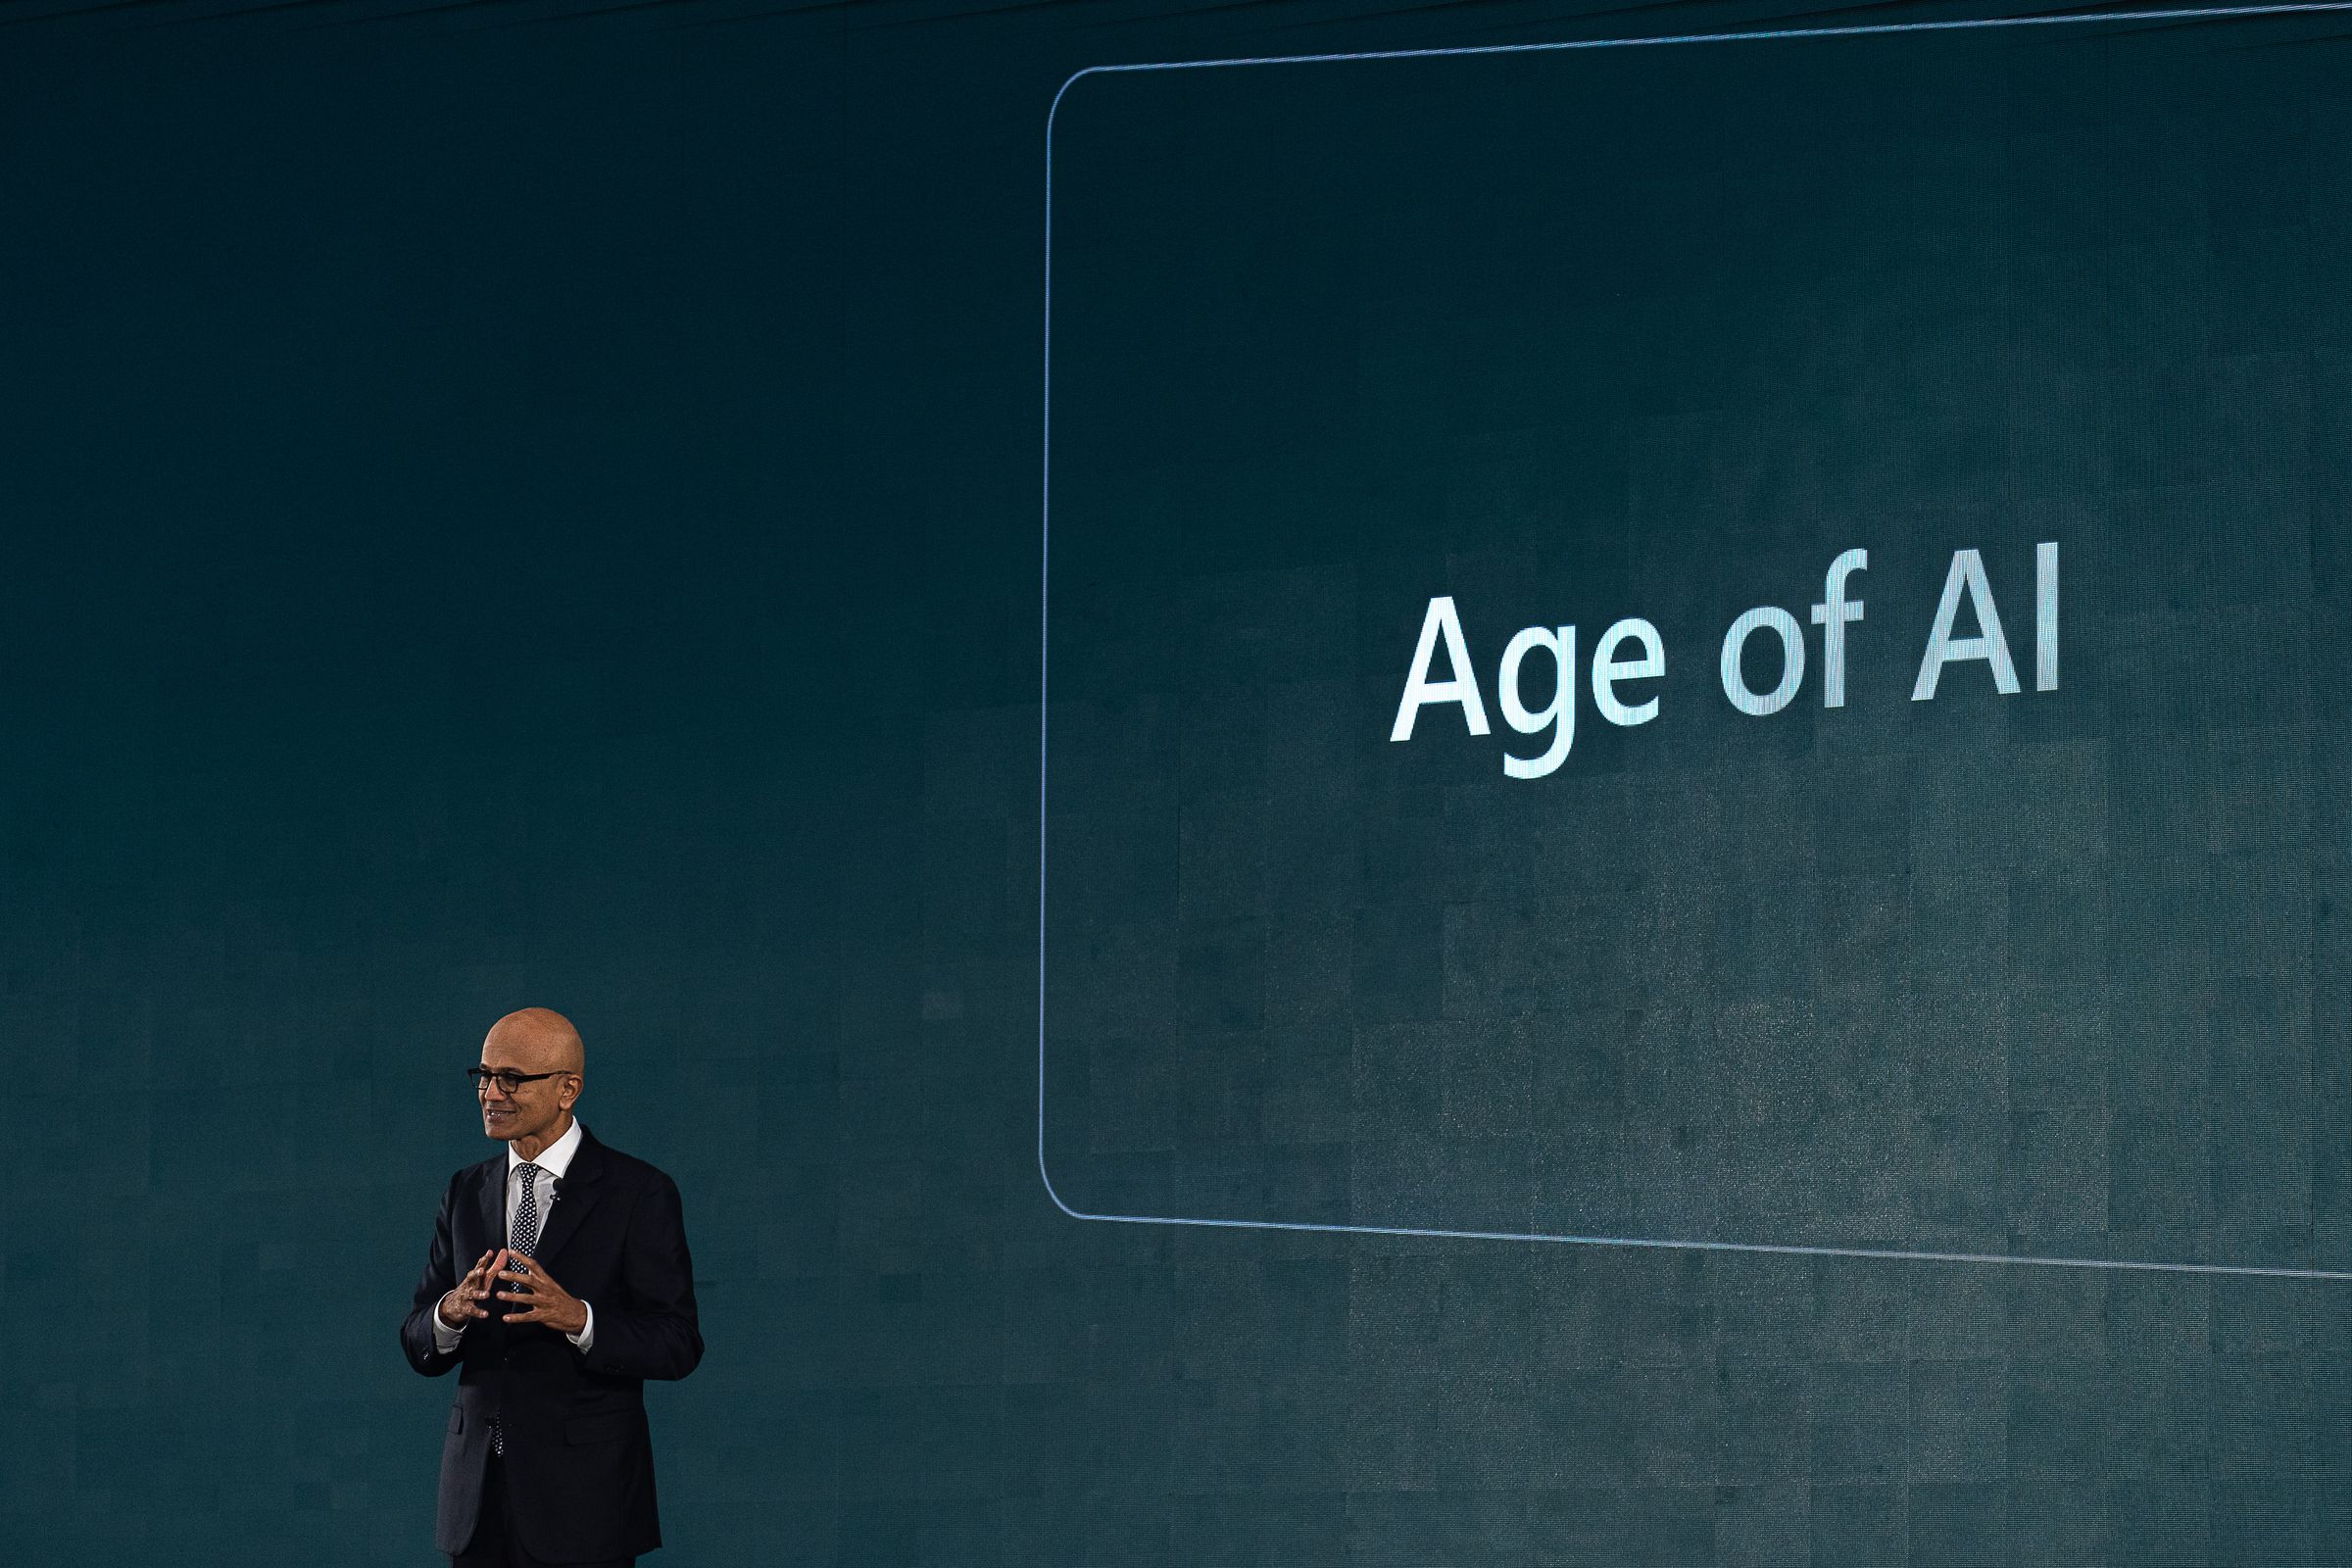 A man speaks in front of a screen that says “Age of AI”